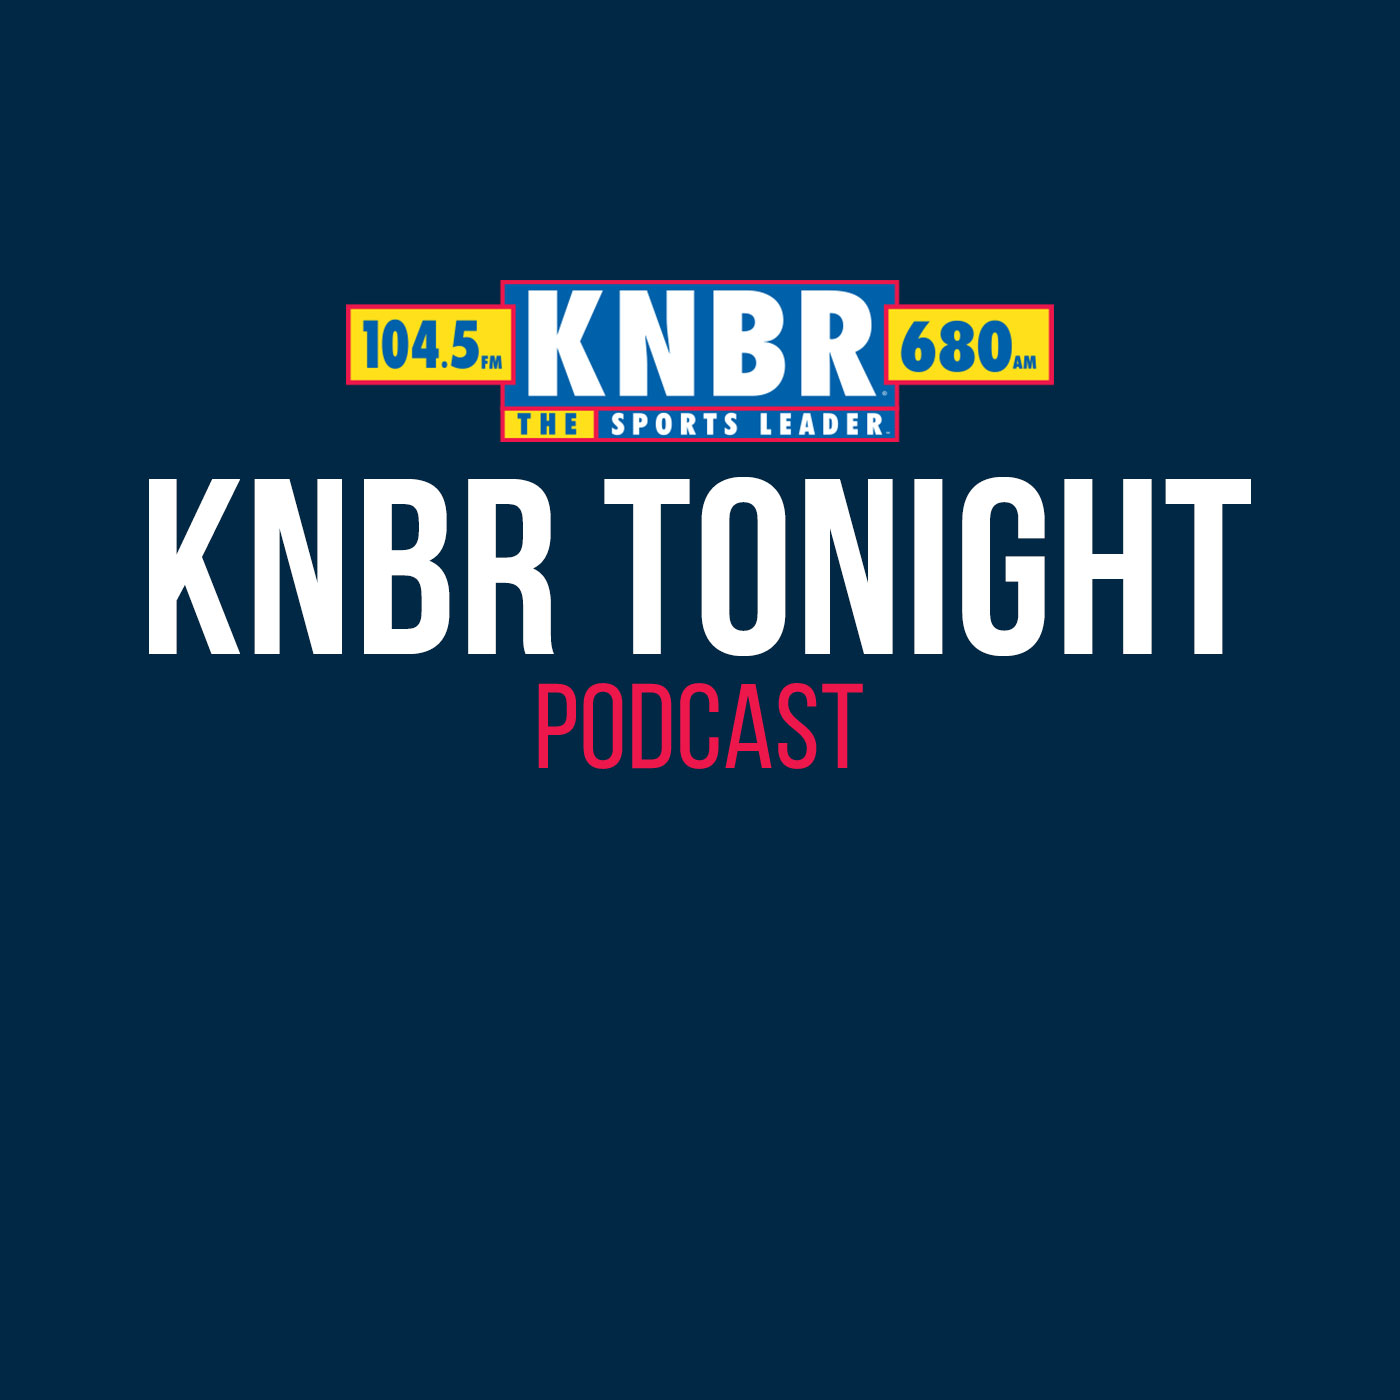 3-25 Marty Lurie joins KNBR Tonight with Scott Reiss to breakdown the Giants offseason moves as we head to the regular season